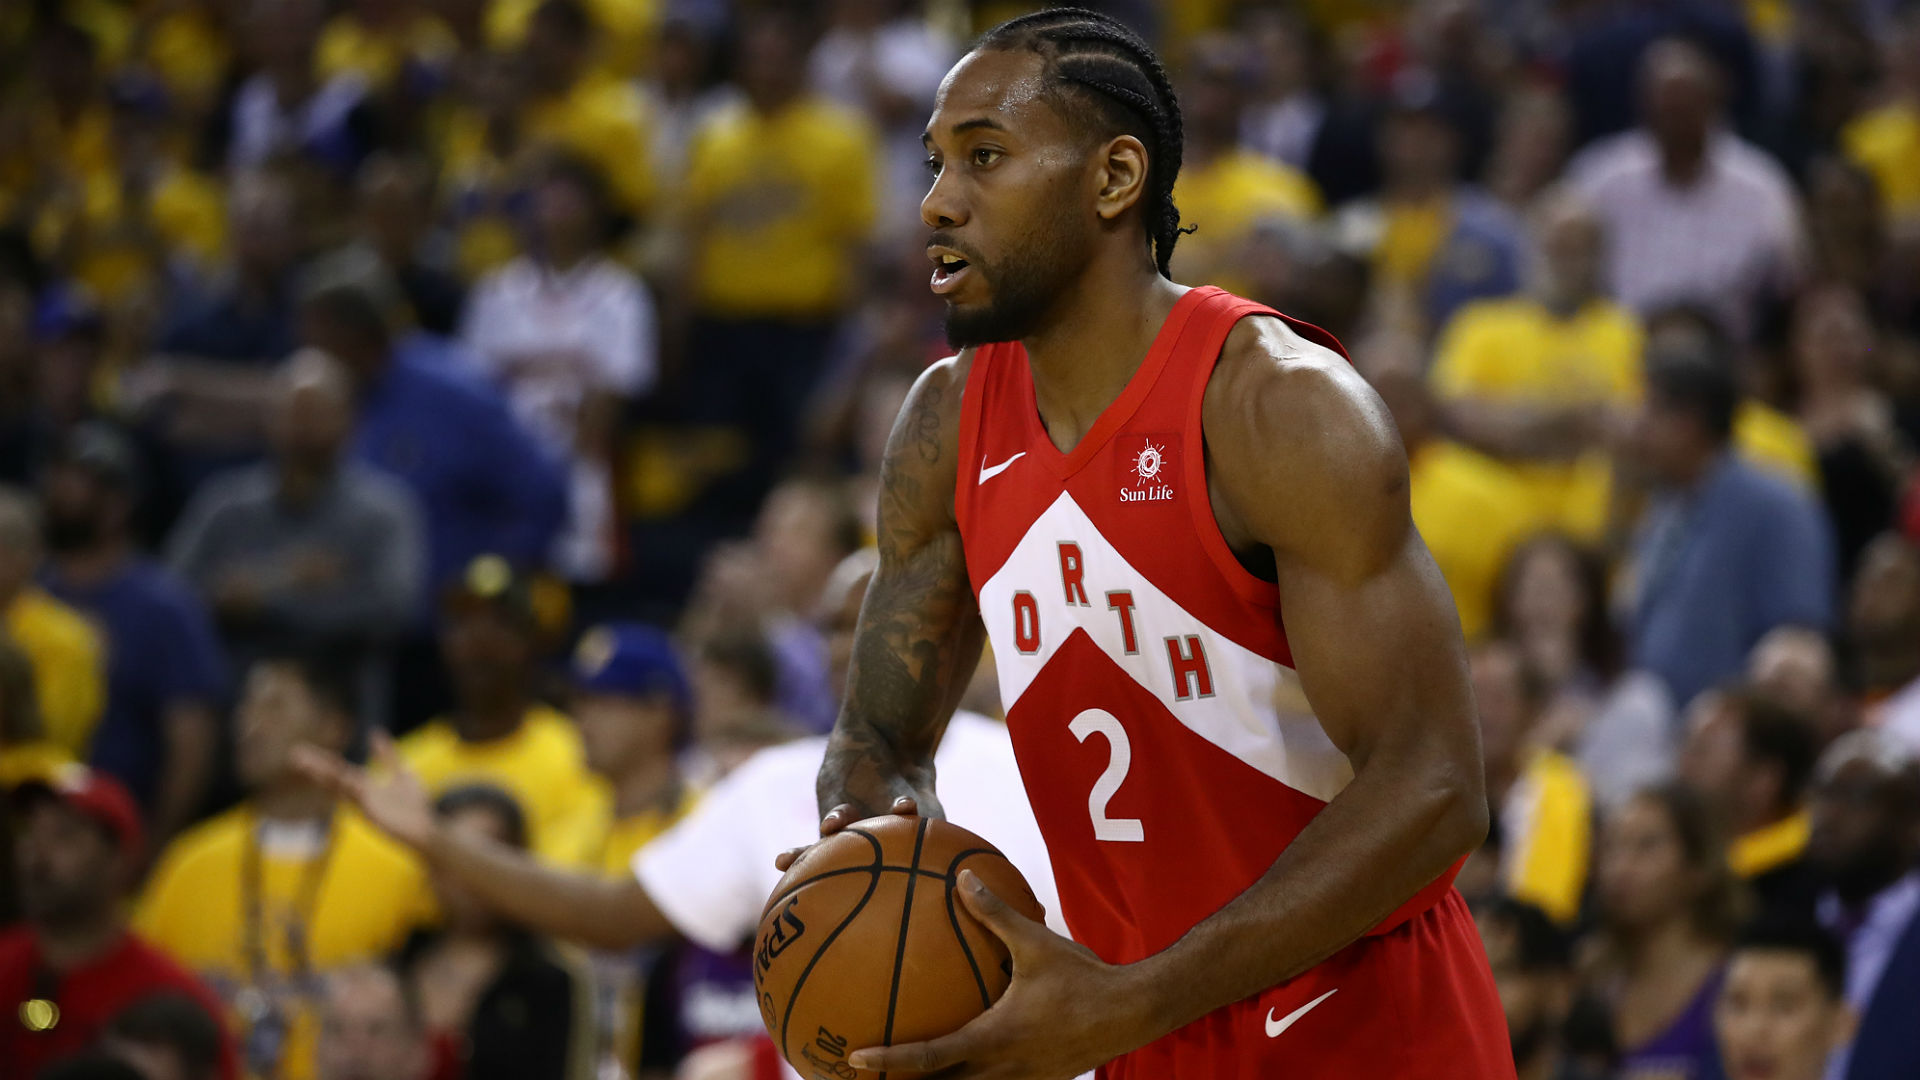 The Toronto Raptors do not want to lose Kawhi Leonard as Fred VanVleet and Marc Gasol discussed the star's future.